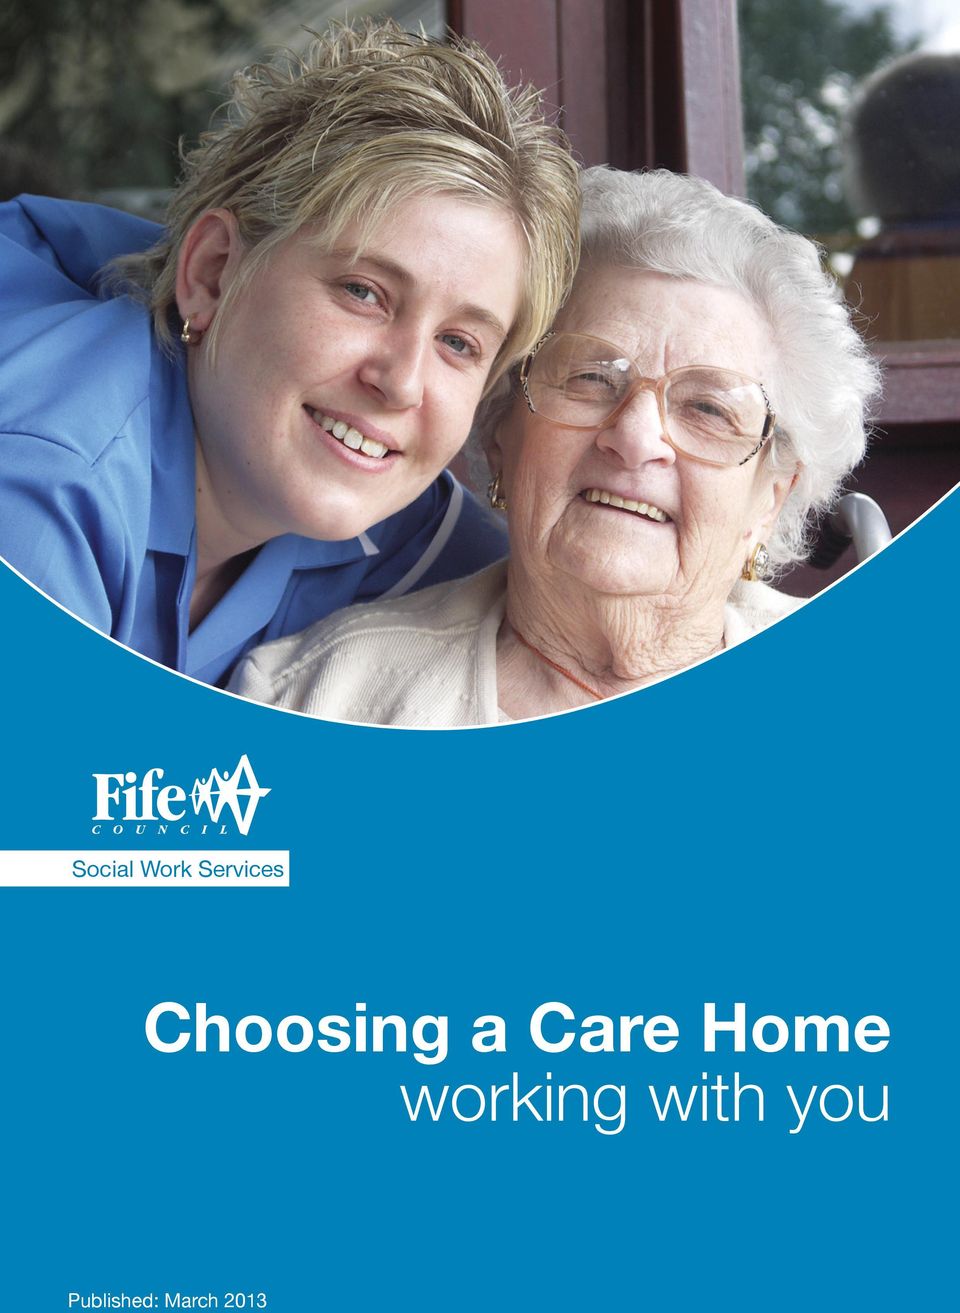 Care Home working